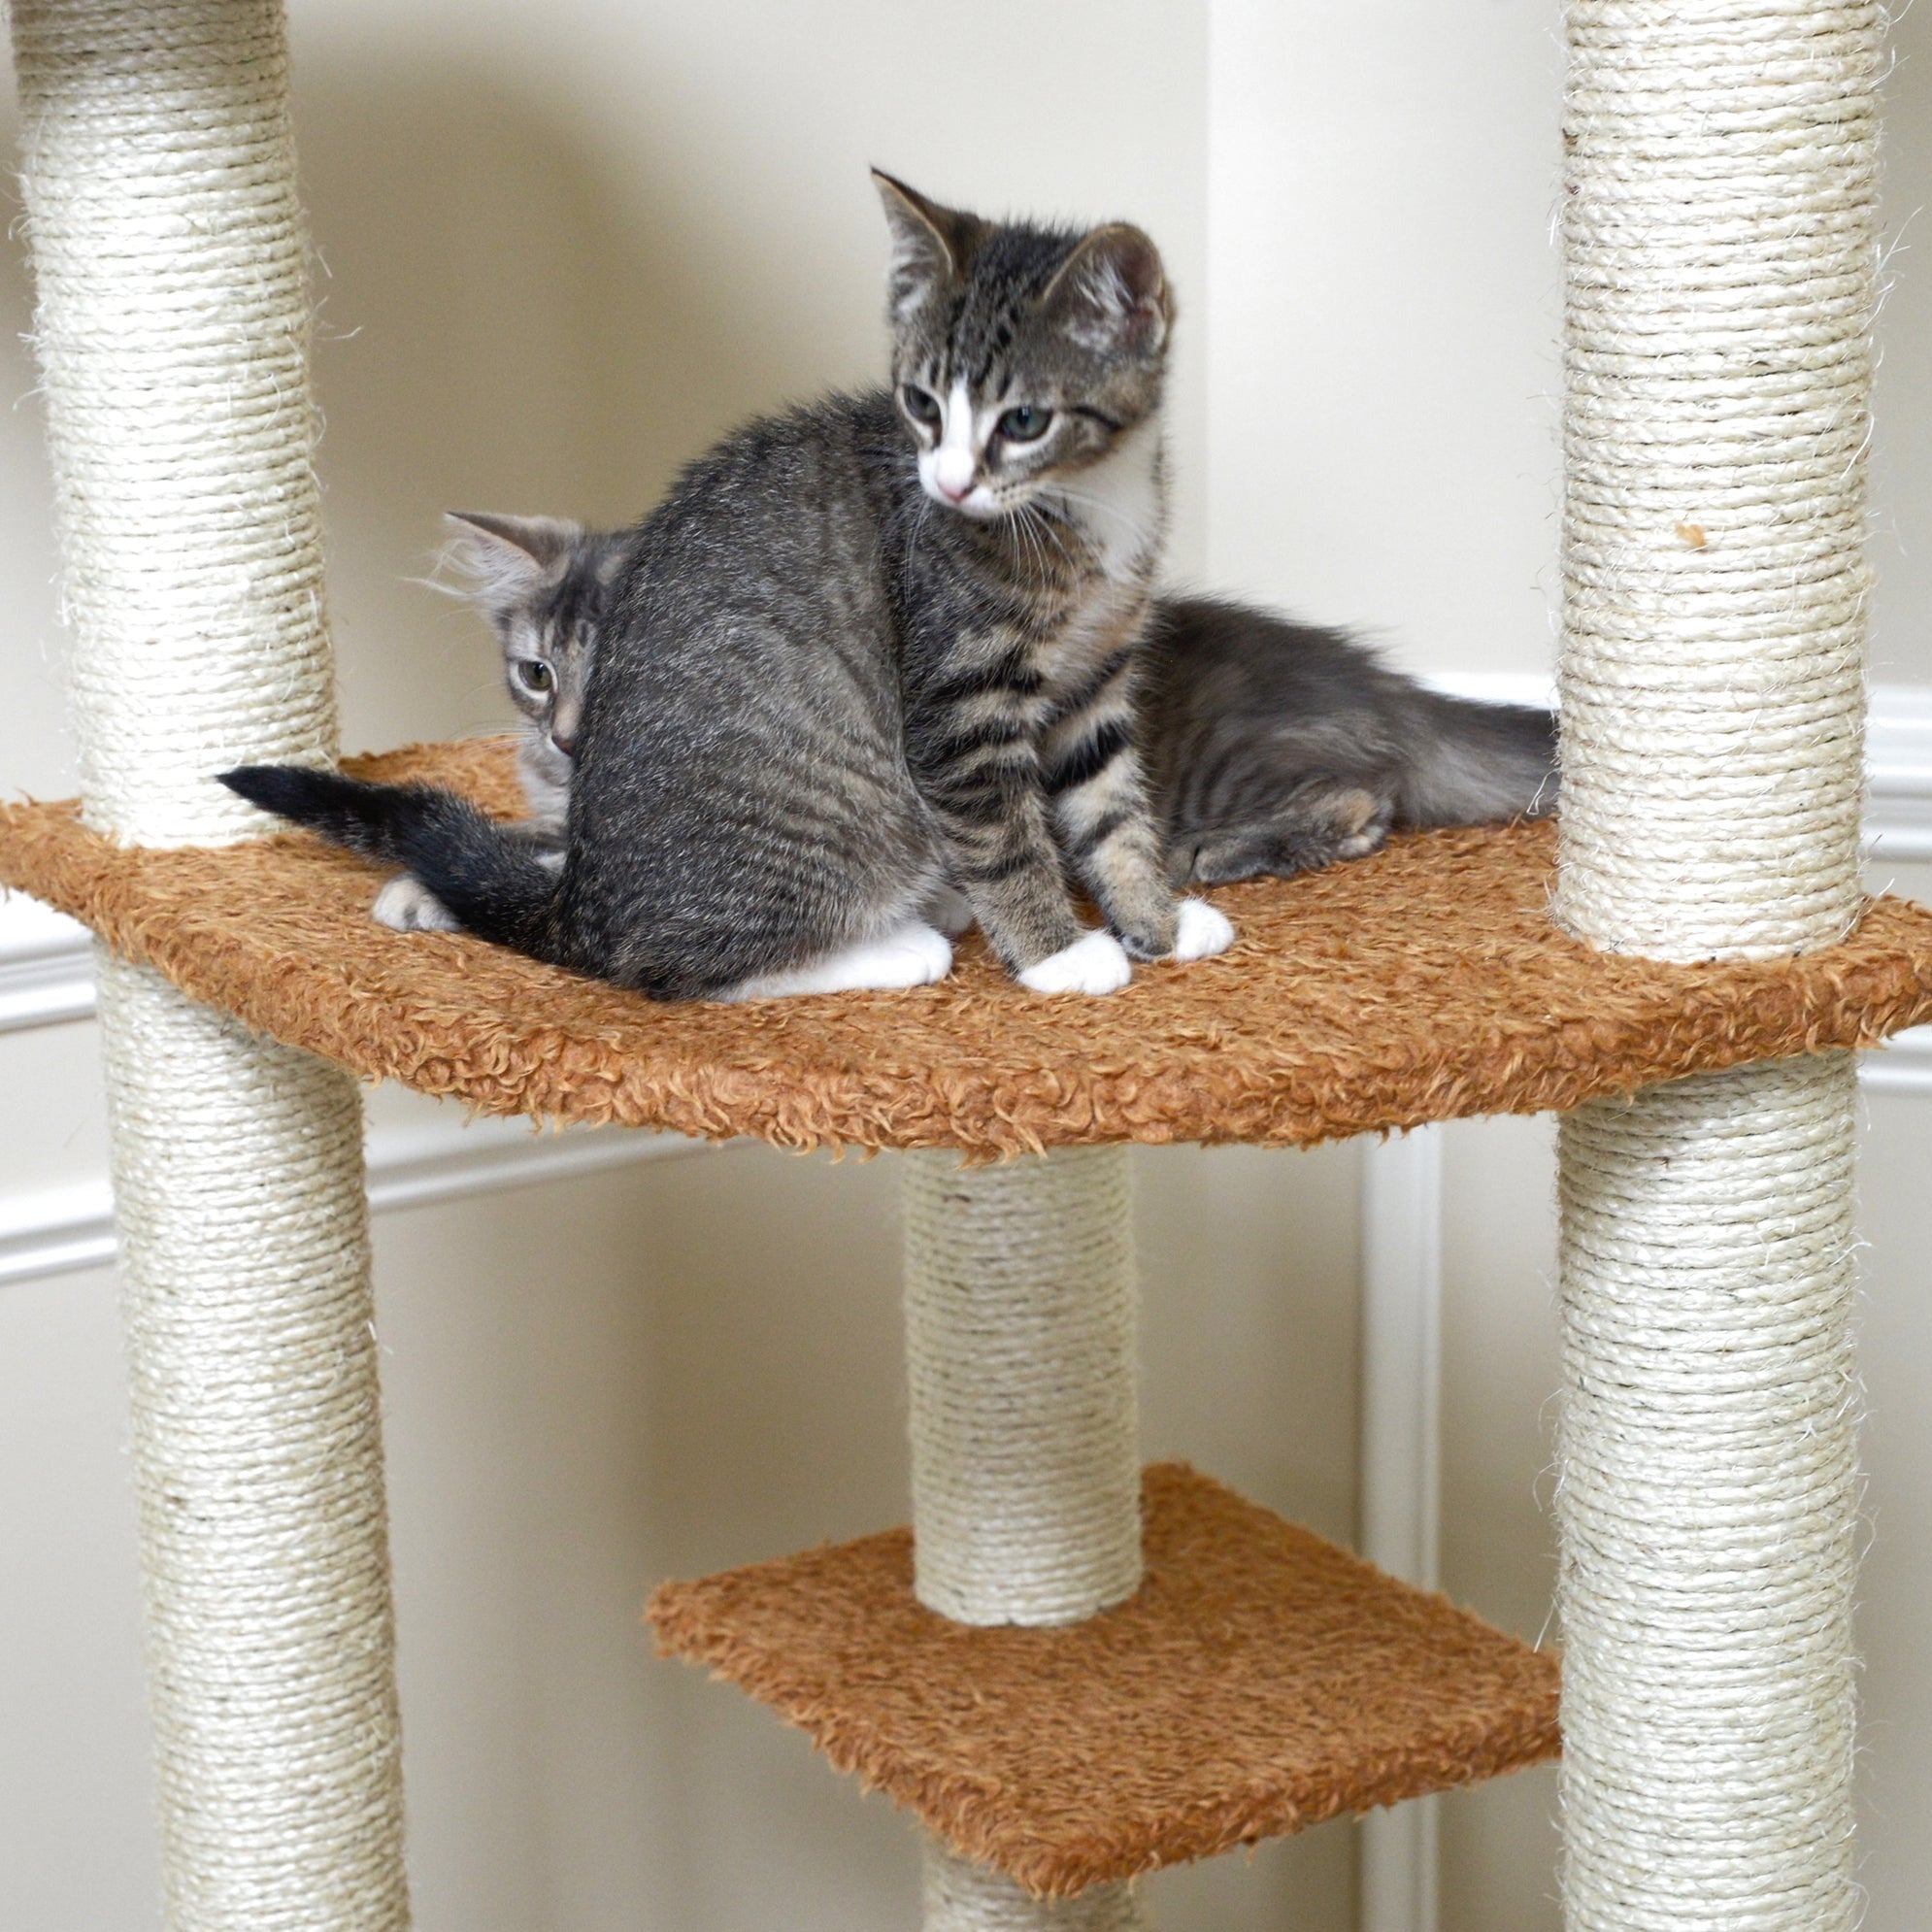 64-inch Ultra-Thick Faux Fur Cat Tree, Chocolate by Armarkat